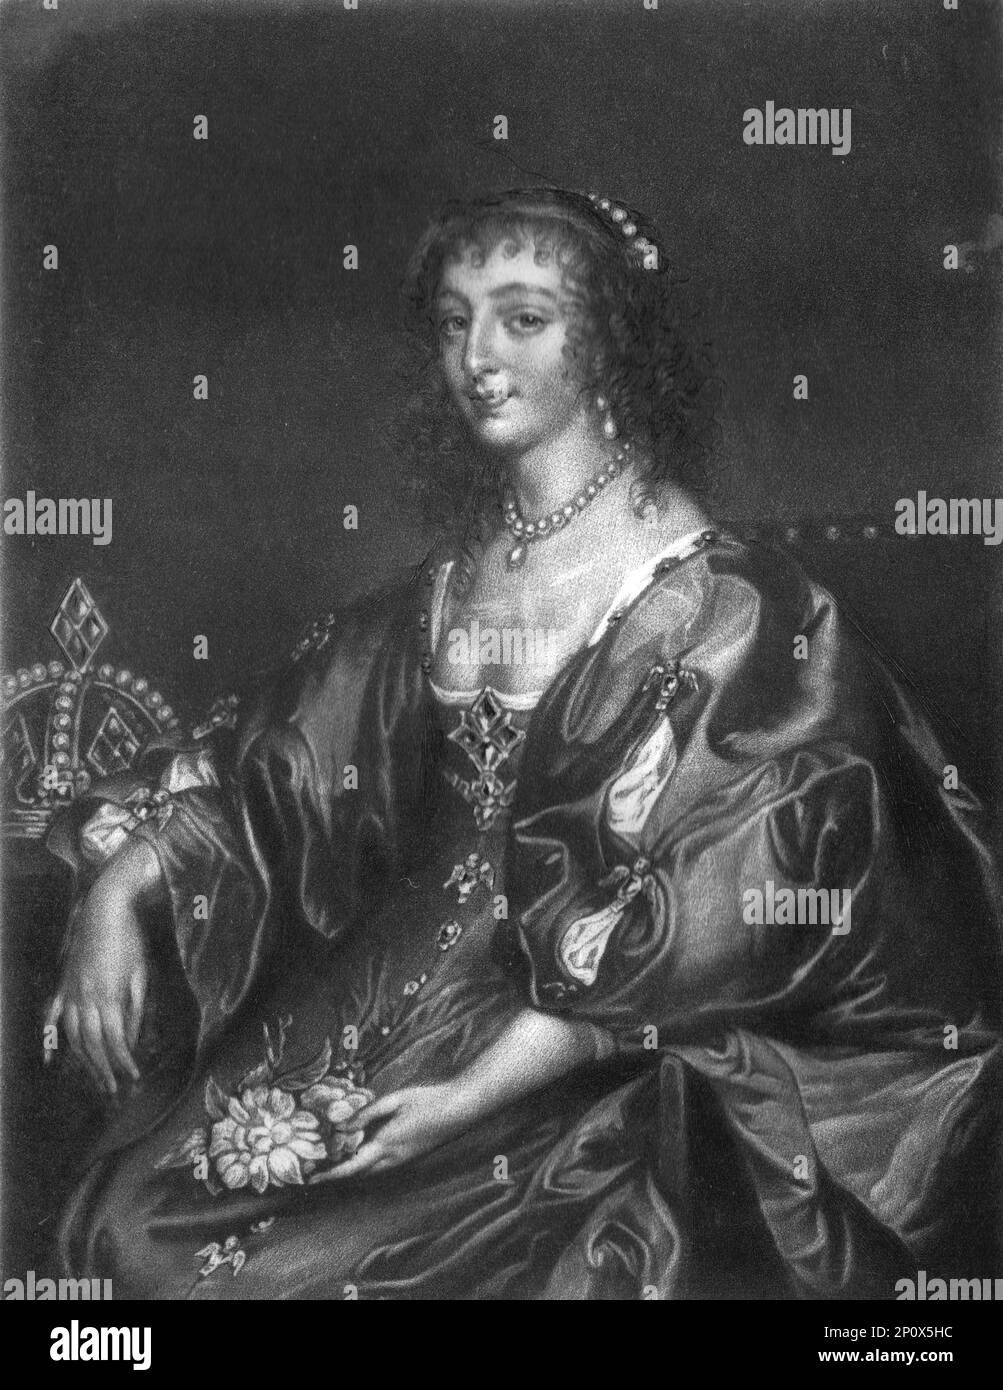 'Henrietta Maria, Queen of Charles I.; Obit 1669'. From From &quot;Portraits of characters illustrious in British History from the beginning of the reign of Henry the Eighth to the end of the reign of James the Second&quot; [Samuel Woodburn, London, 1815]. Stock Photo